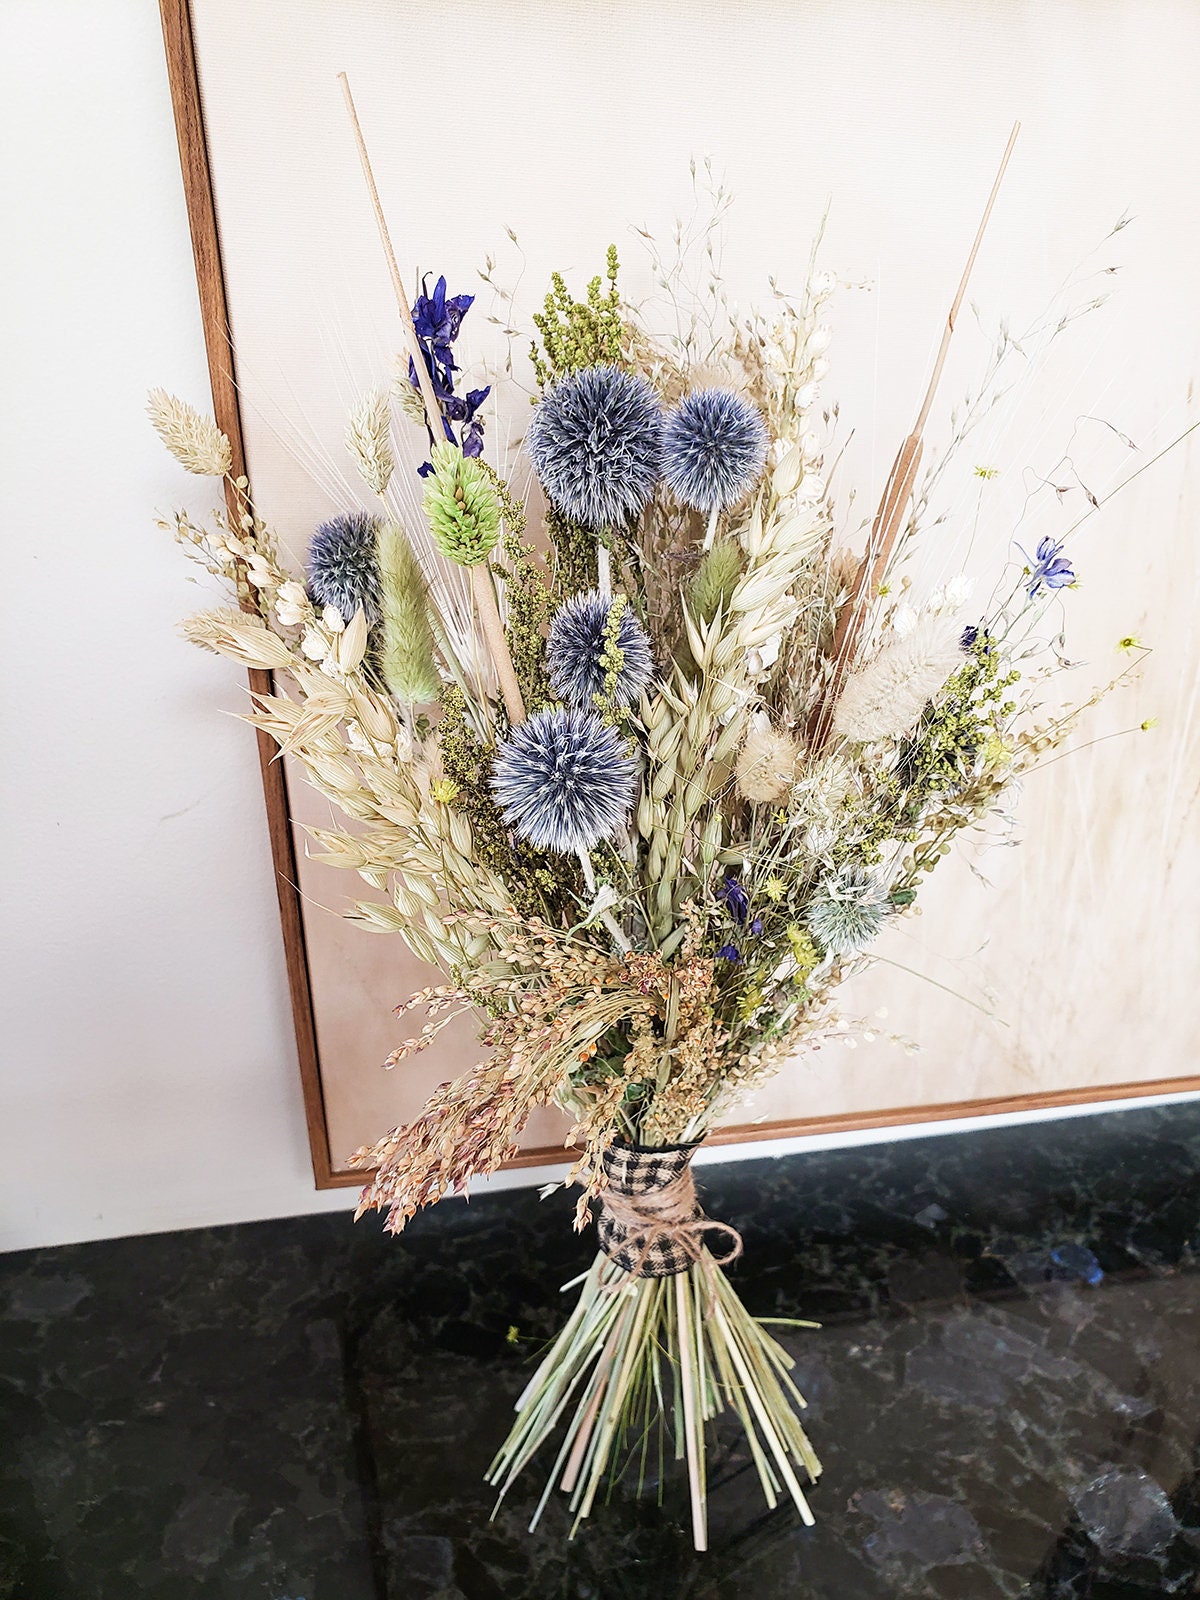 Dried Boho Flower Bouquet made out of Ornamental Grass & Blue Globe Thistles